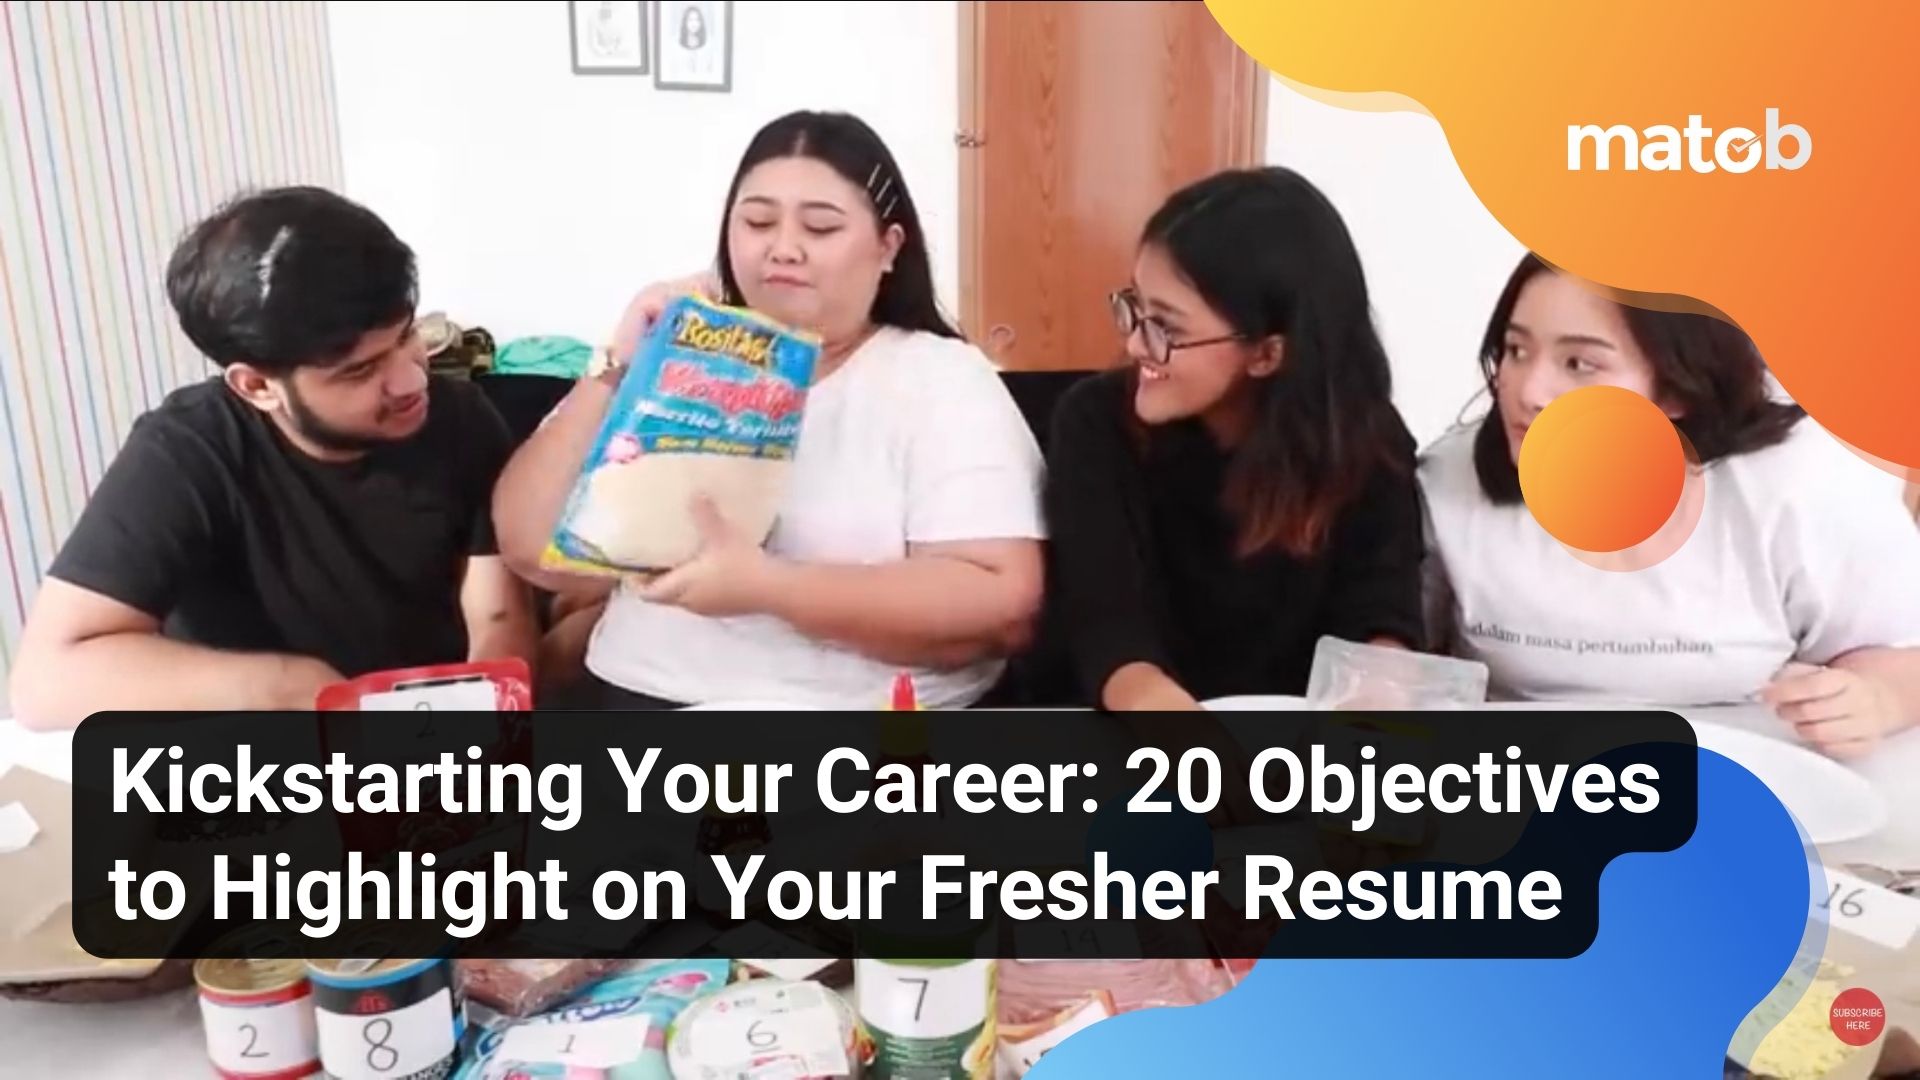 Kickstarting Your Career: 20 Objectives to Highlight on Your Fresher Resume